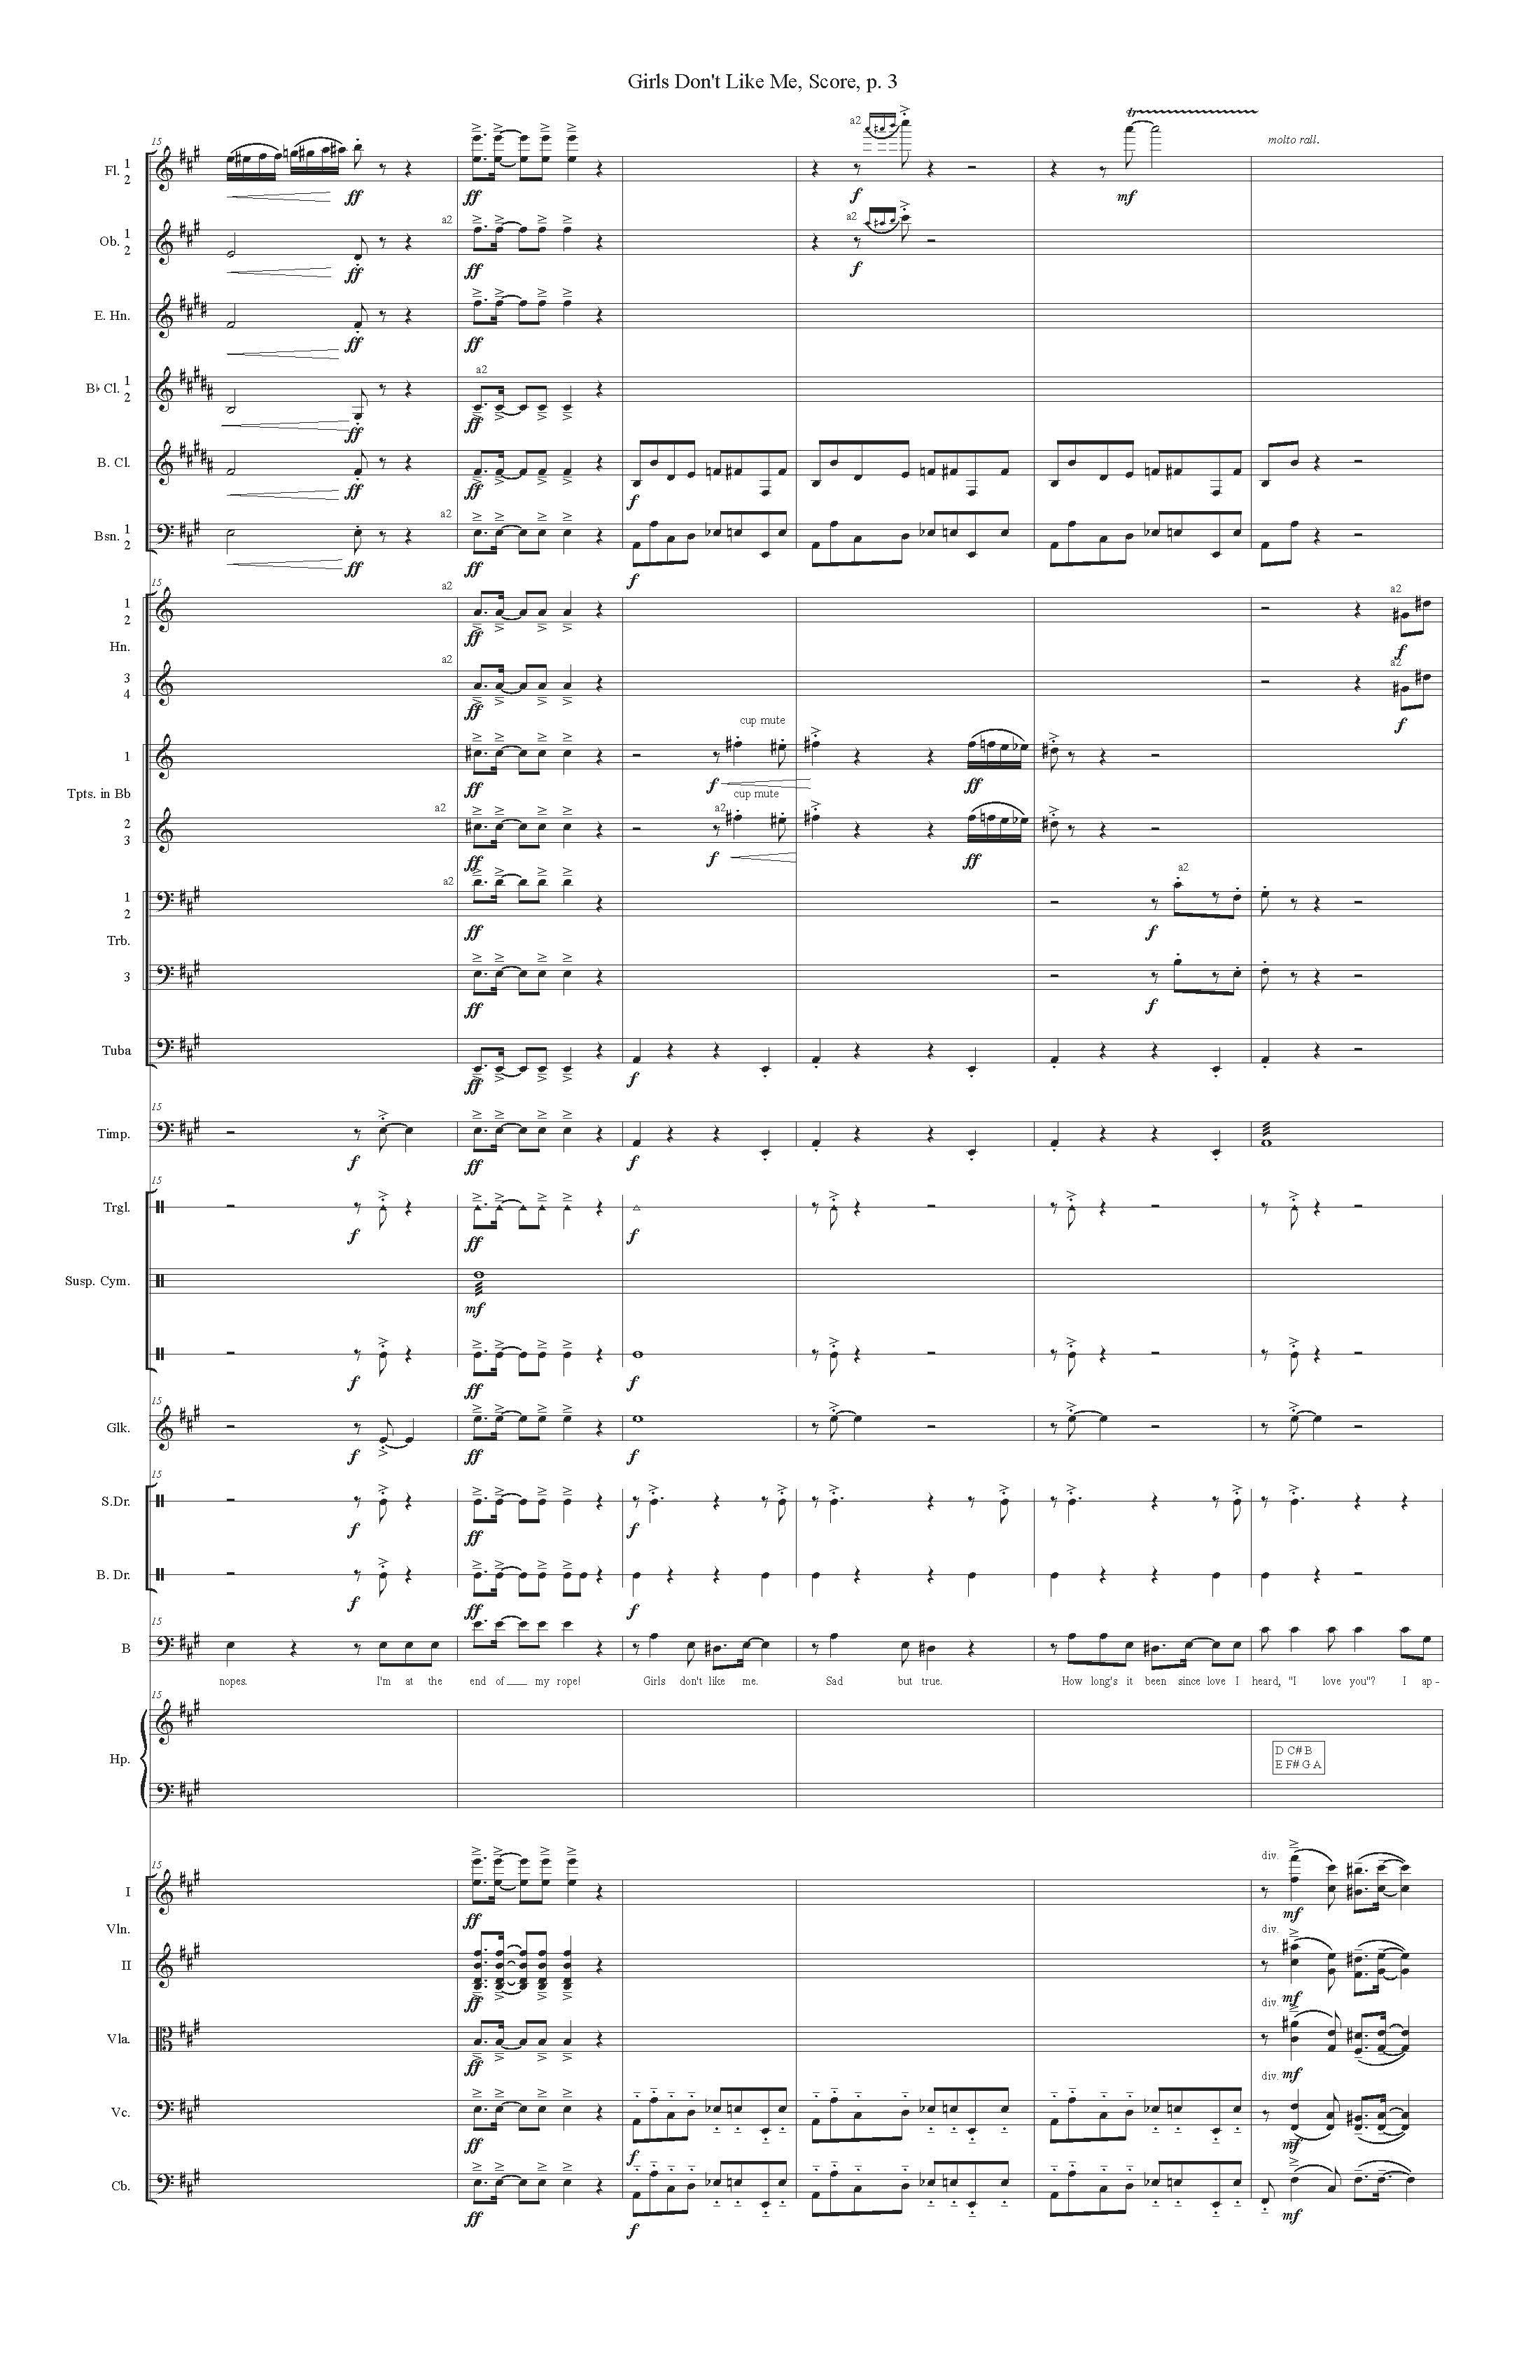 GIRLS DON'T LIKE ME ORCH - Score_Page_03.jpg